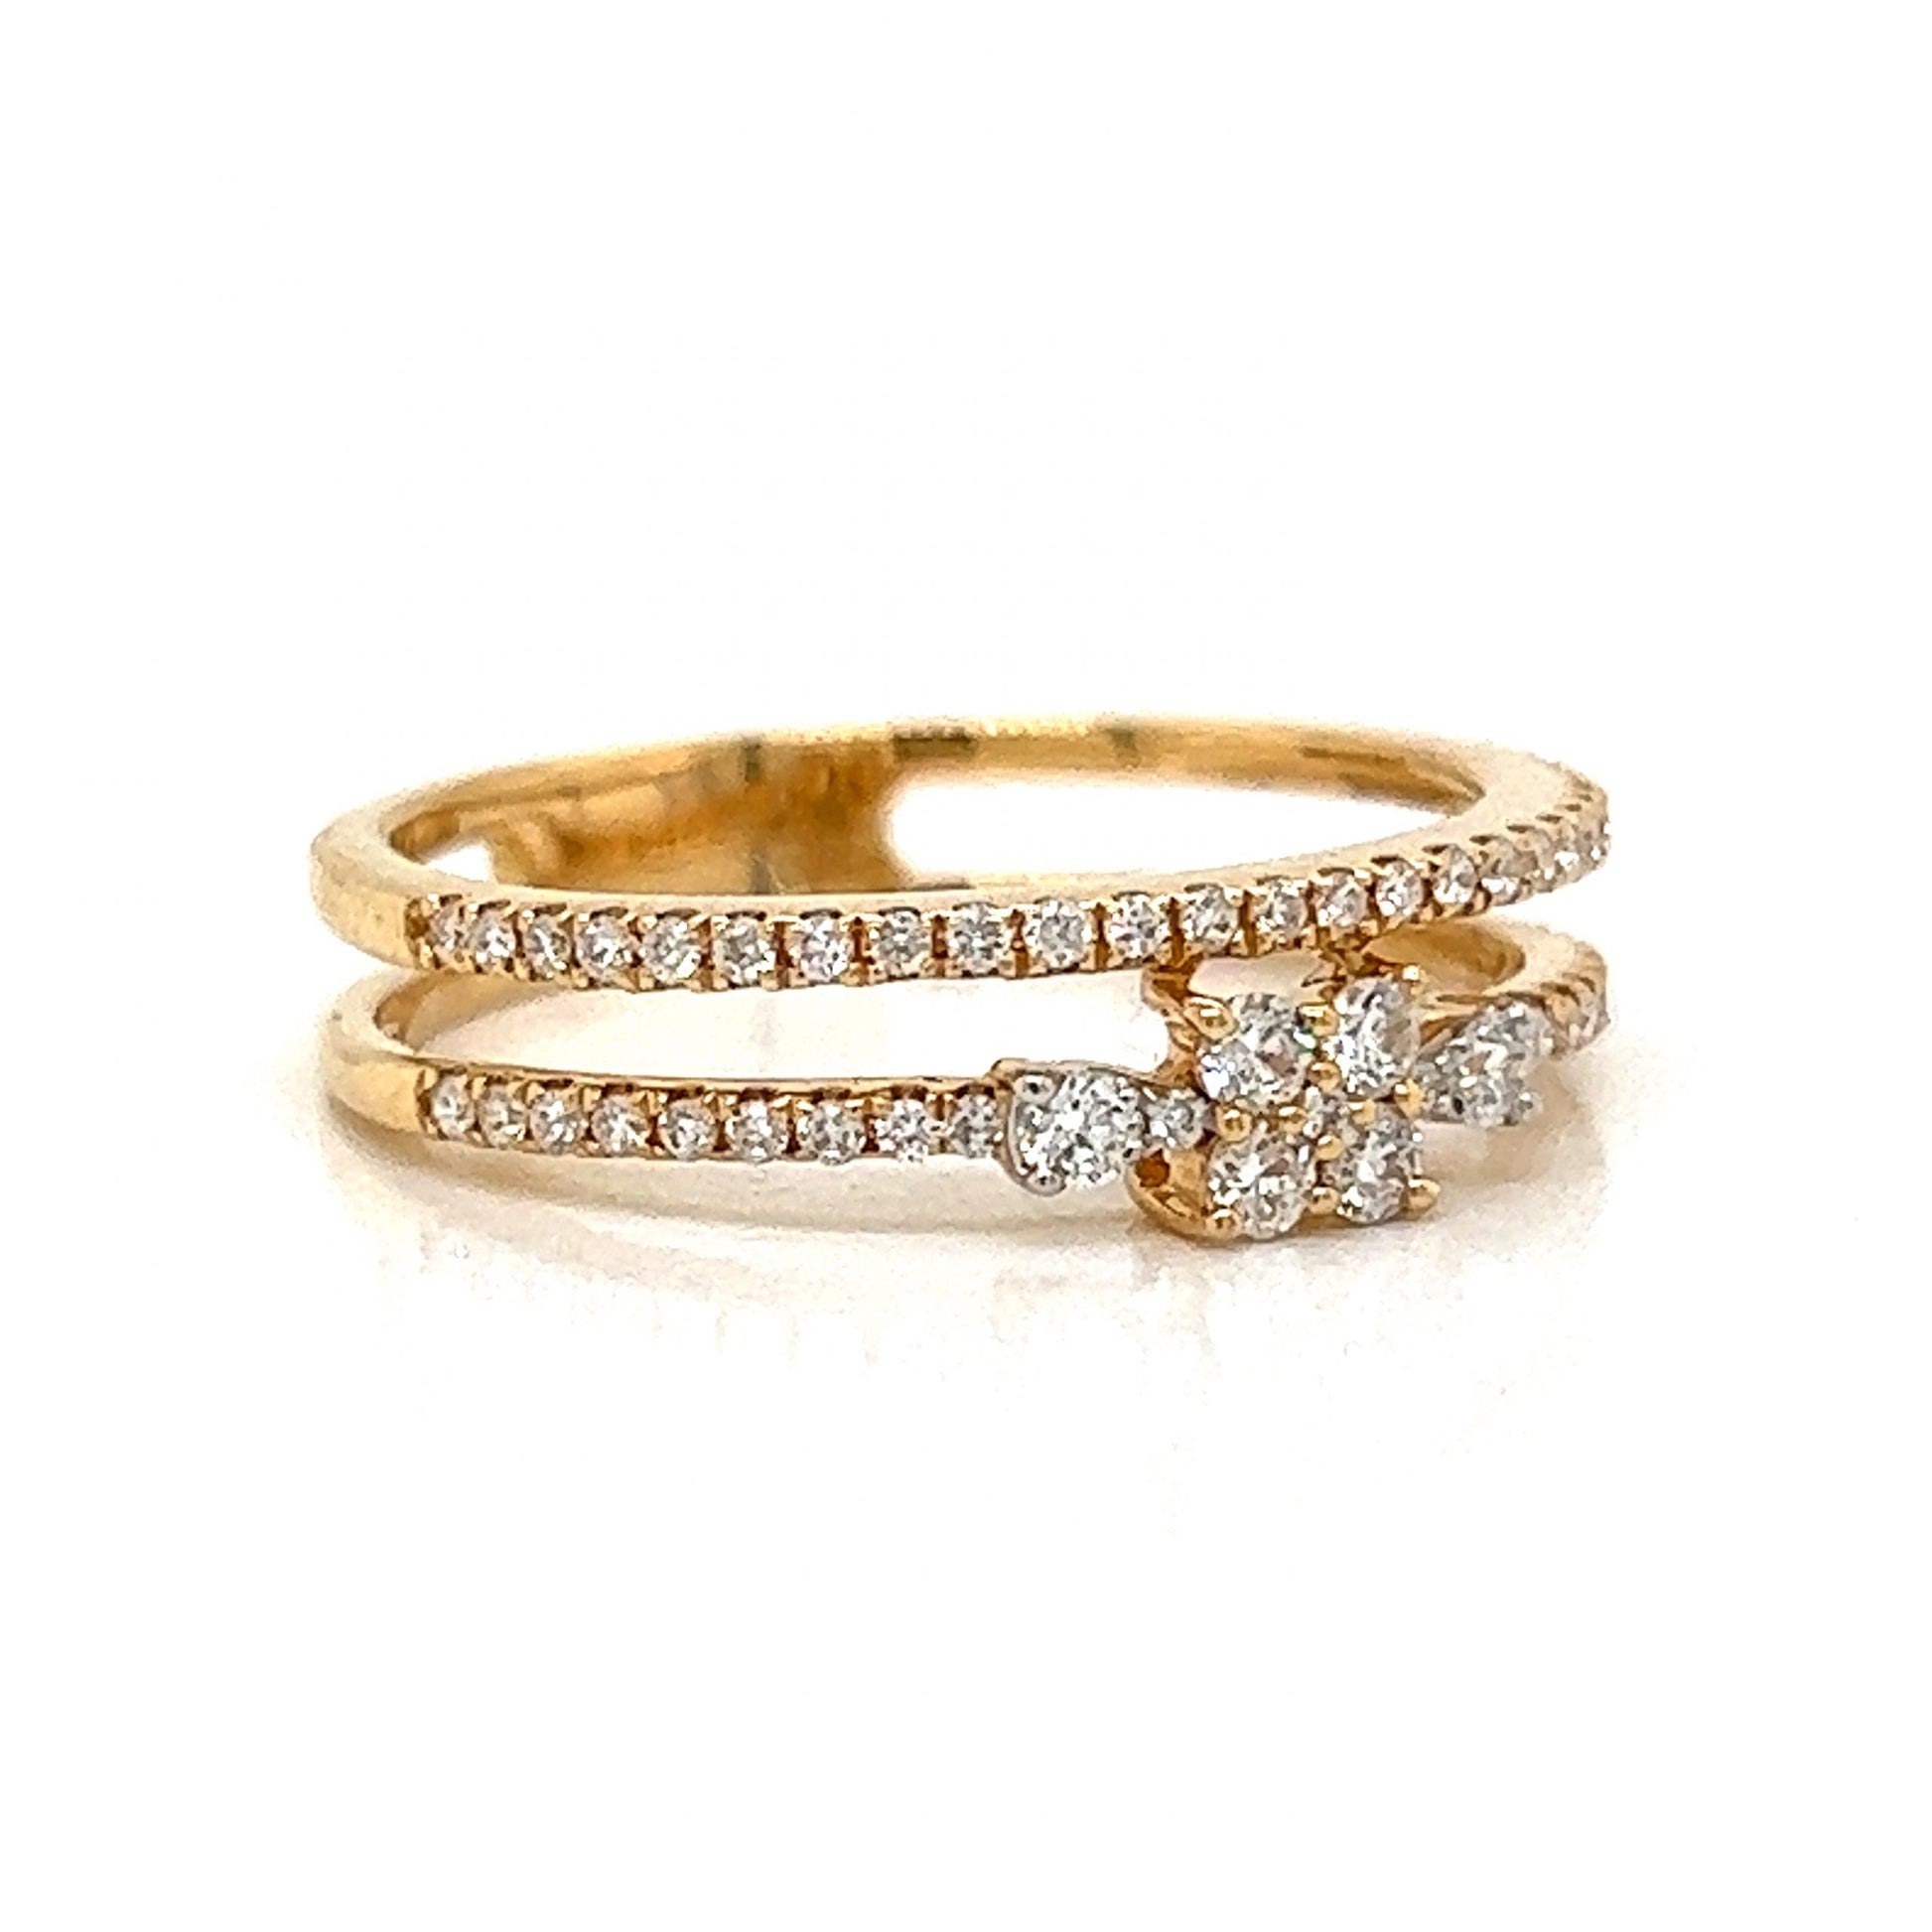 Stacked Pave Diamond Ring in 18k Yellow GoldComposition: 18 Karat Yellow GoldRing Size: 7Total Diamond Weight: .32 ctTotal Gram Weight: 2.7 gInscription: D0.322 18k 750